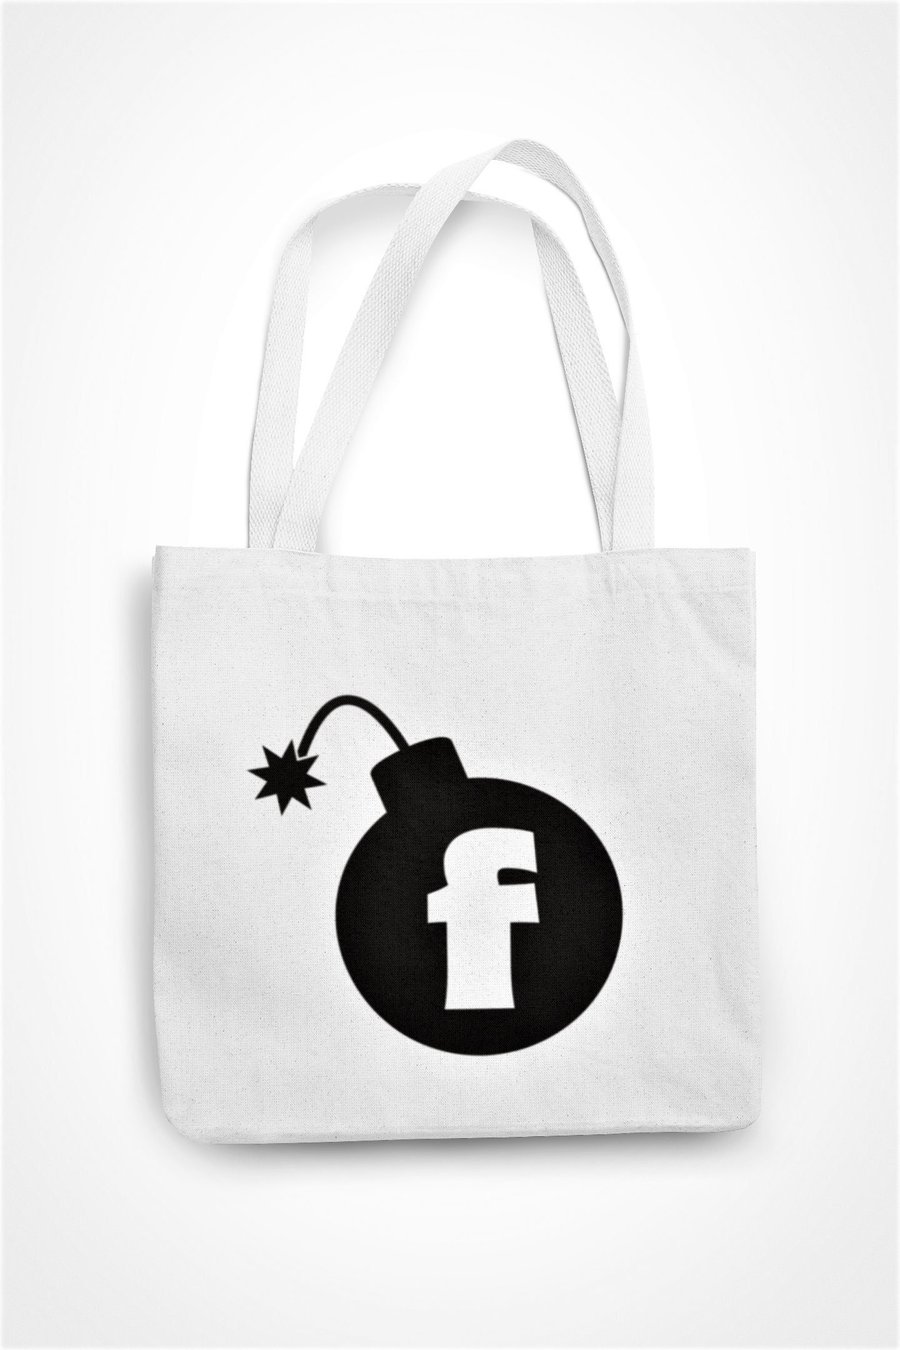 F Bomb Tote Bag Funny Rude Offensive Swear Bag Funny Gift For Friends Eco Friend